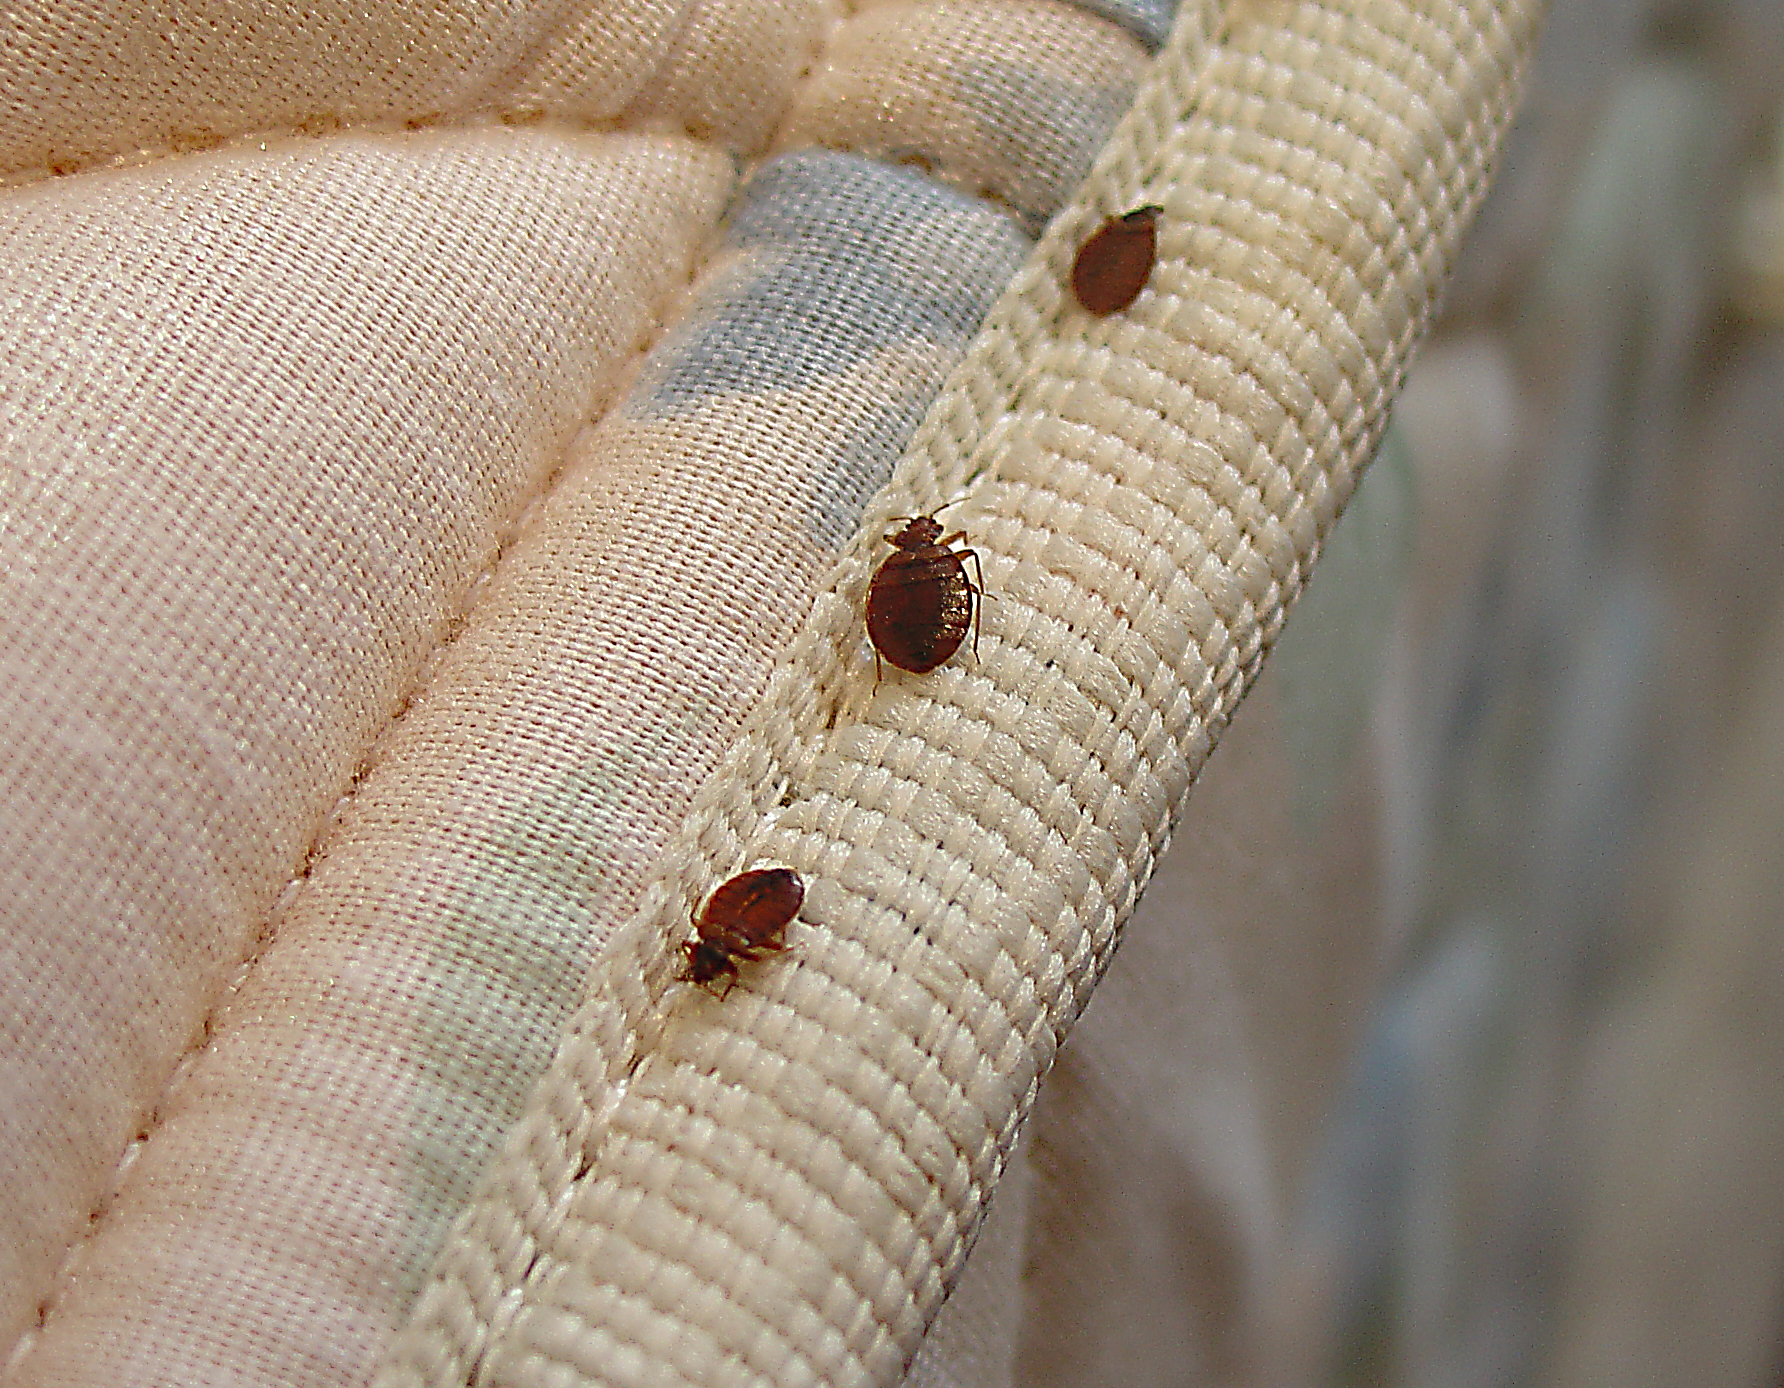 pictures of bed bugs in mattress